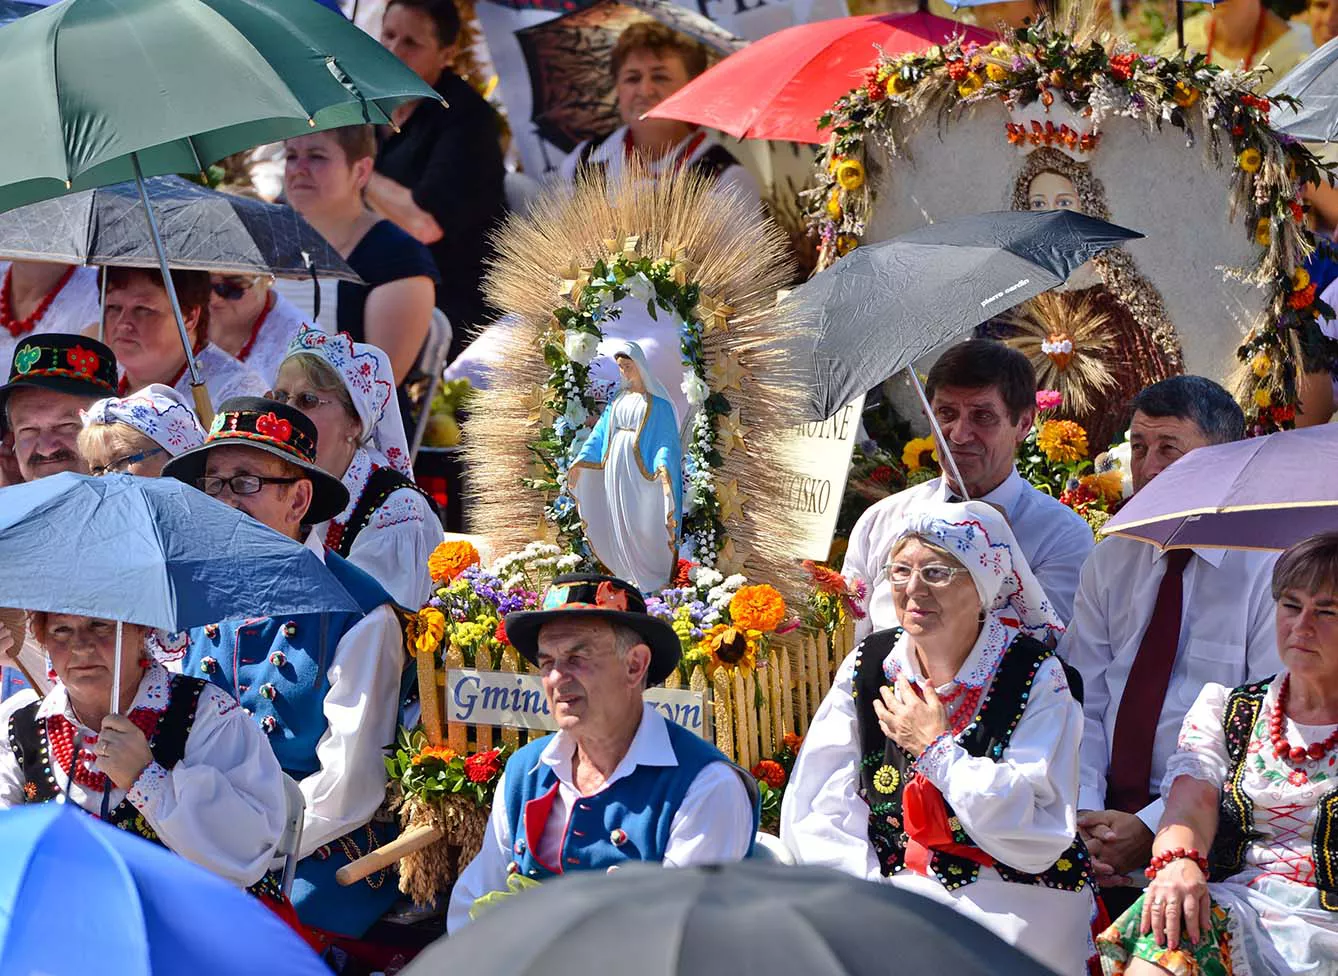 Annual Harvest Festival" Hundreds of people dressed in traditional folk costumes with wreaths and loaves from Parishes and Deaneries of the Diocese of Rzeszow